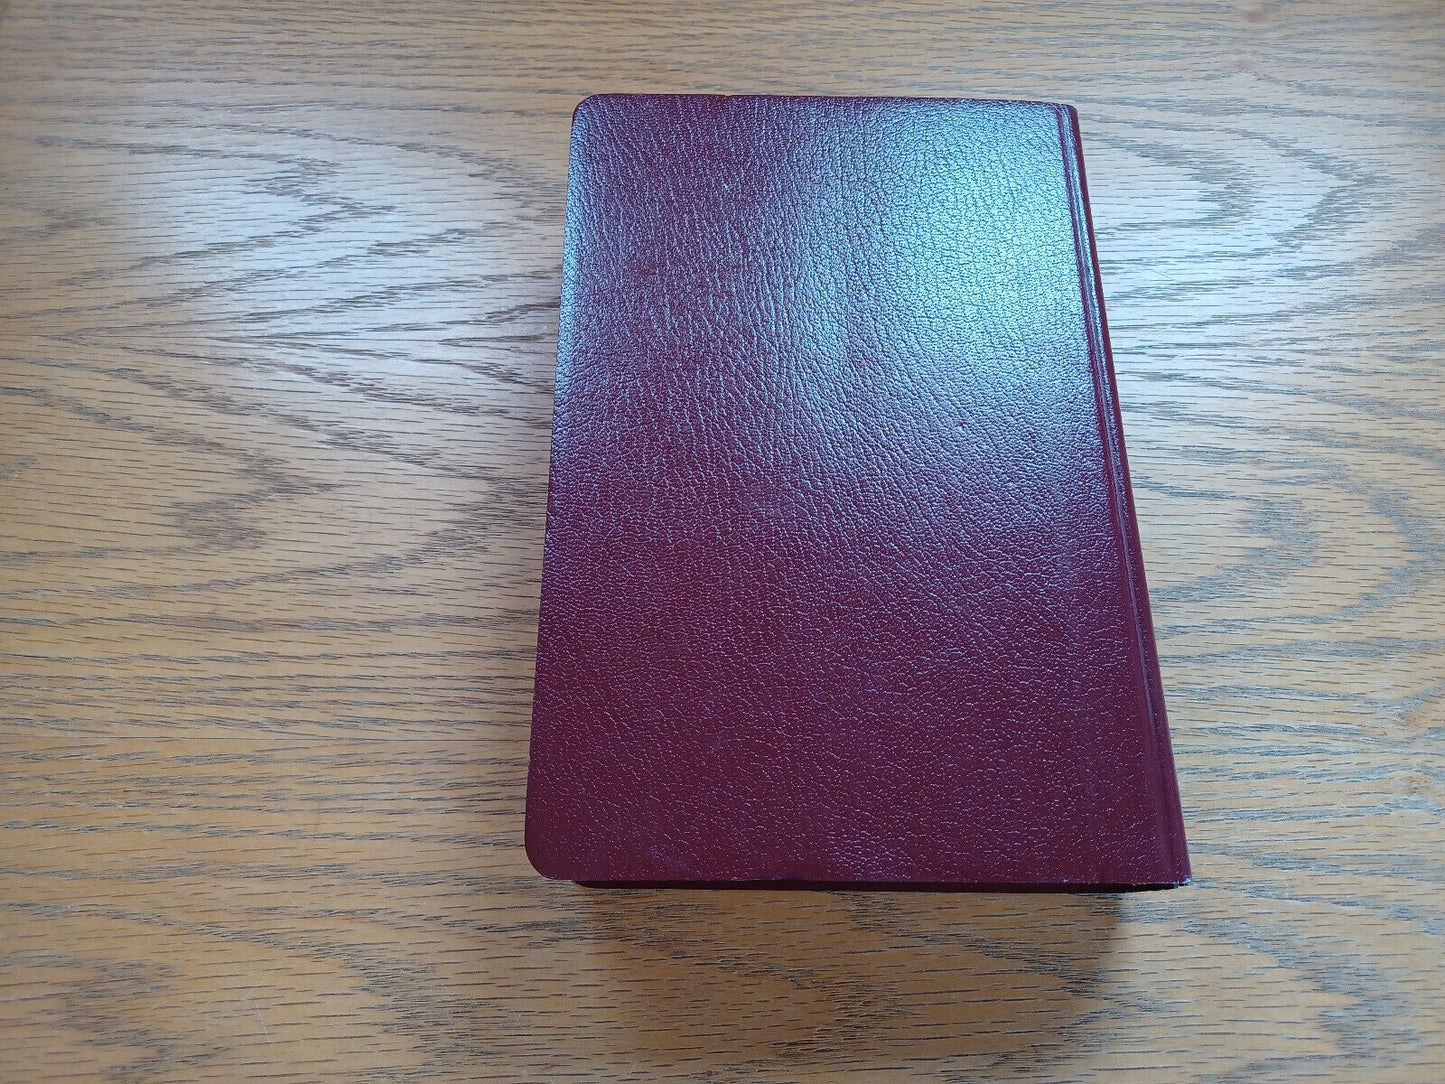 New American Bible Holy Bible Gift And Sacraments Edition 1991